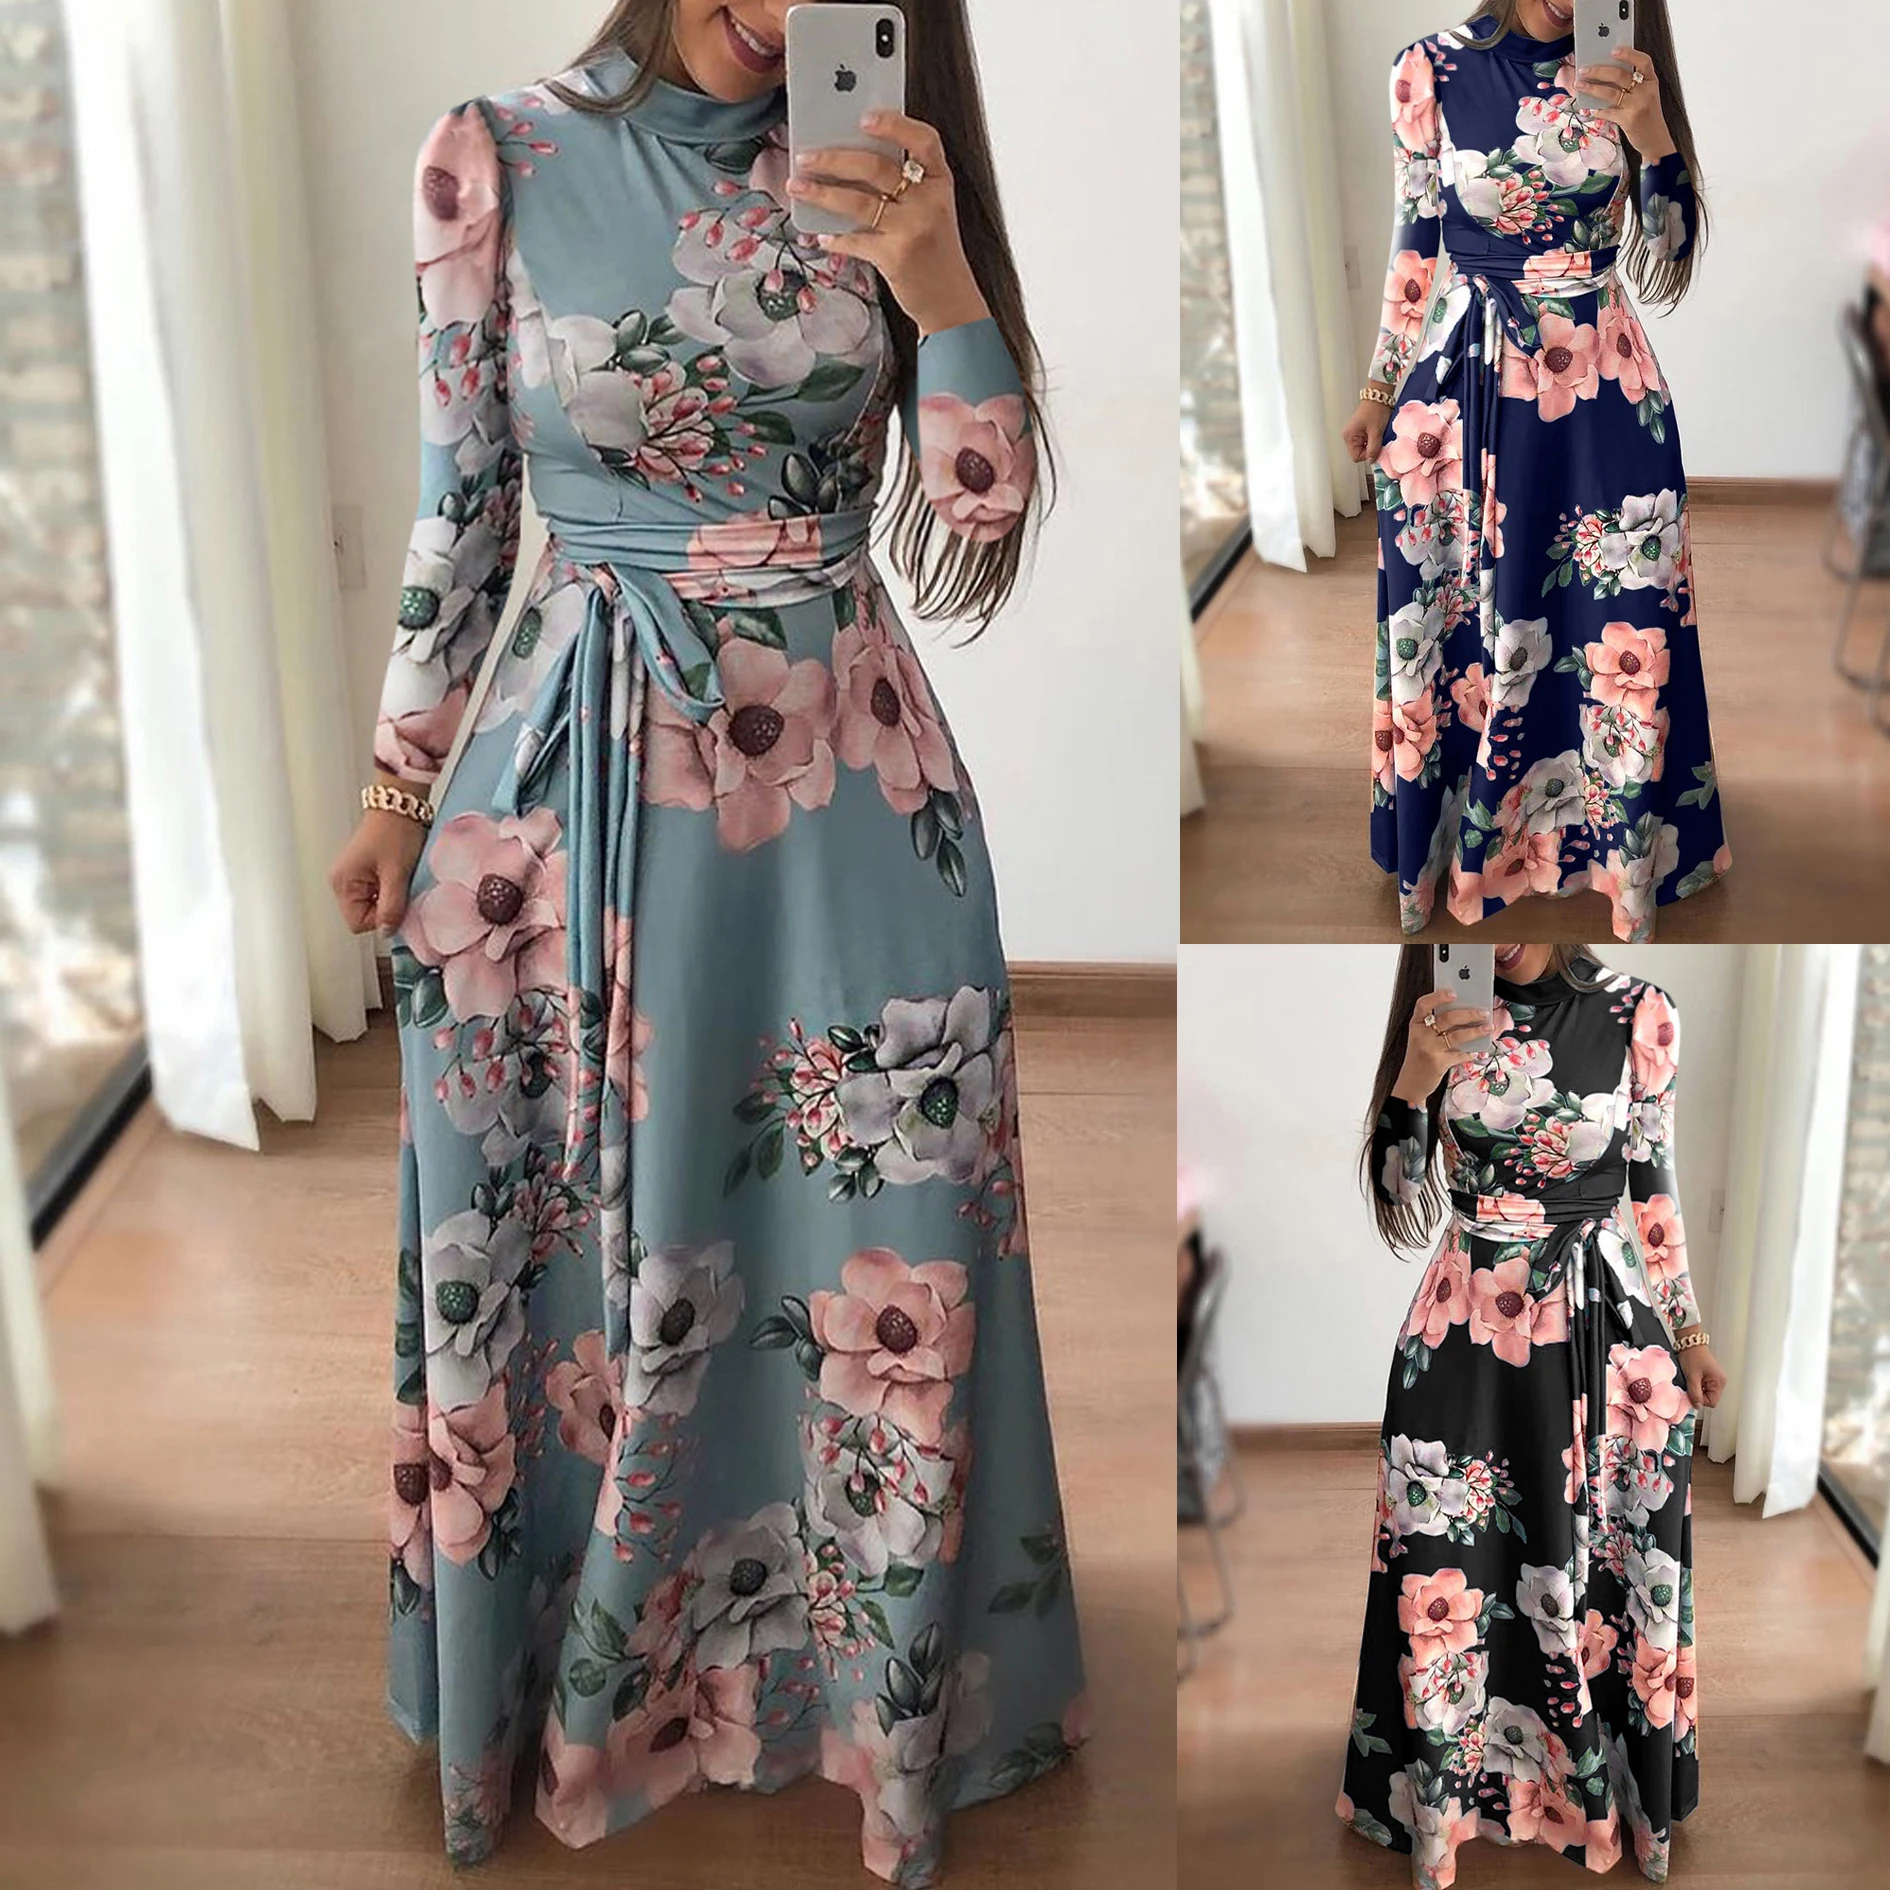 

2021 New style O-neck long sleeve polyester fabric printing floral casual women sping summer dress Kleid vestido de dama